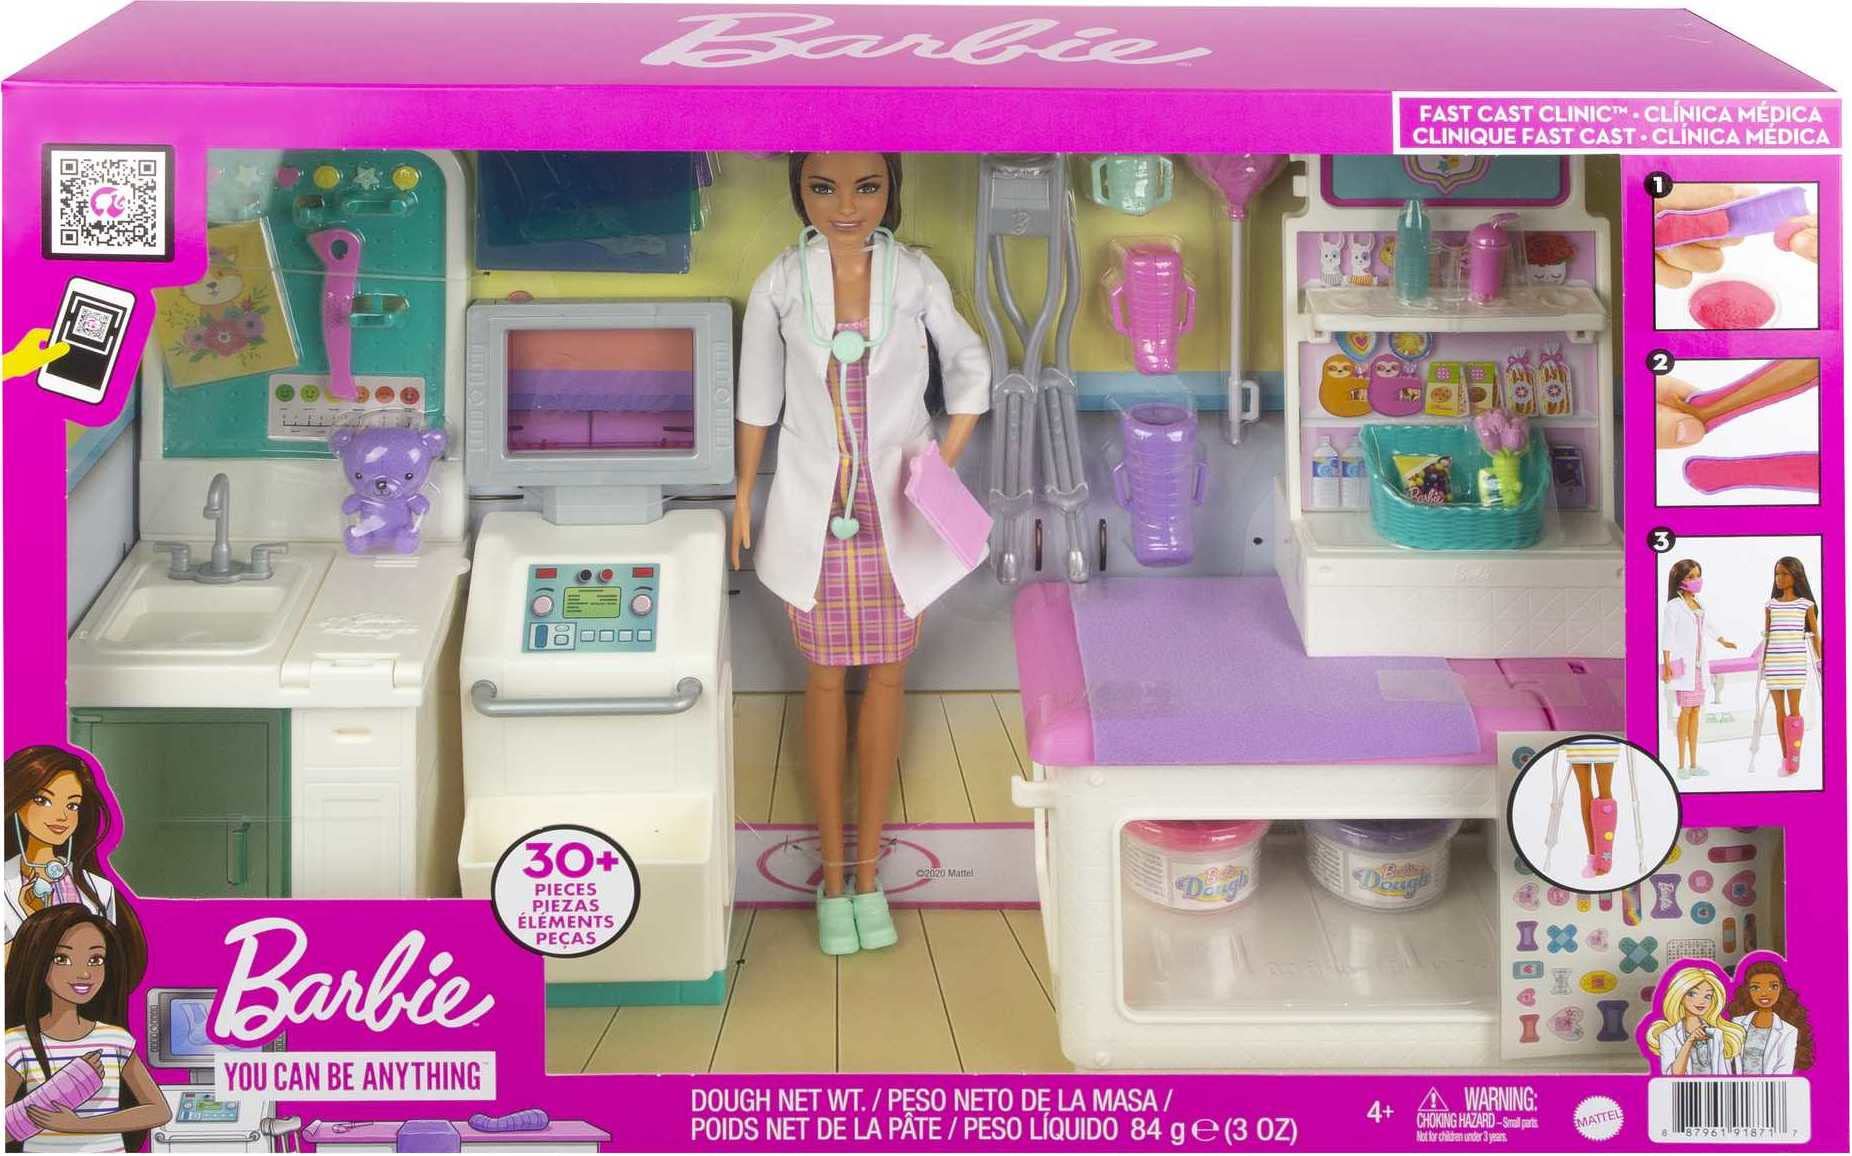 Barbie Fast Cast Clinic Doll & Playset, Brunette Doctor Doll, Furniture & 30+ Accessories Including Molds & Dough for Bandages